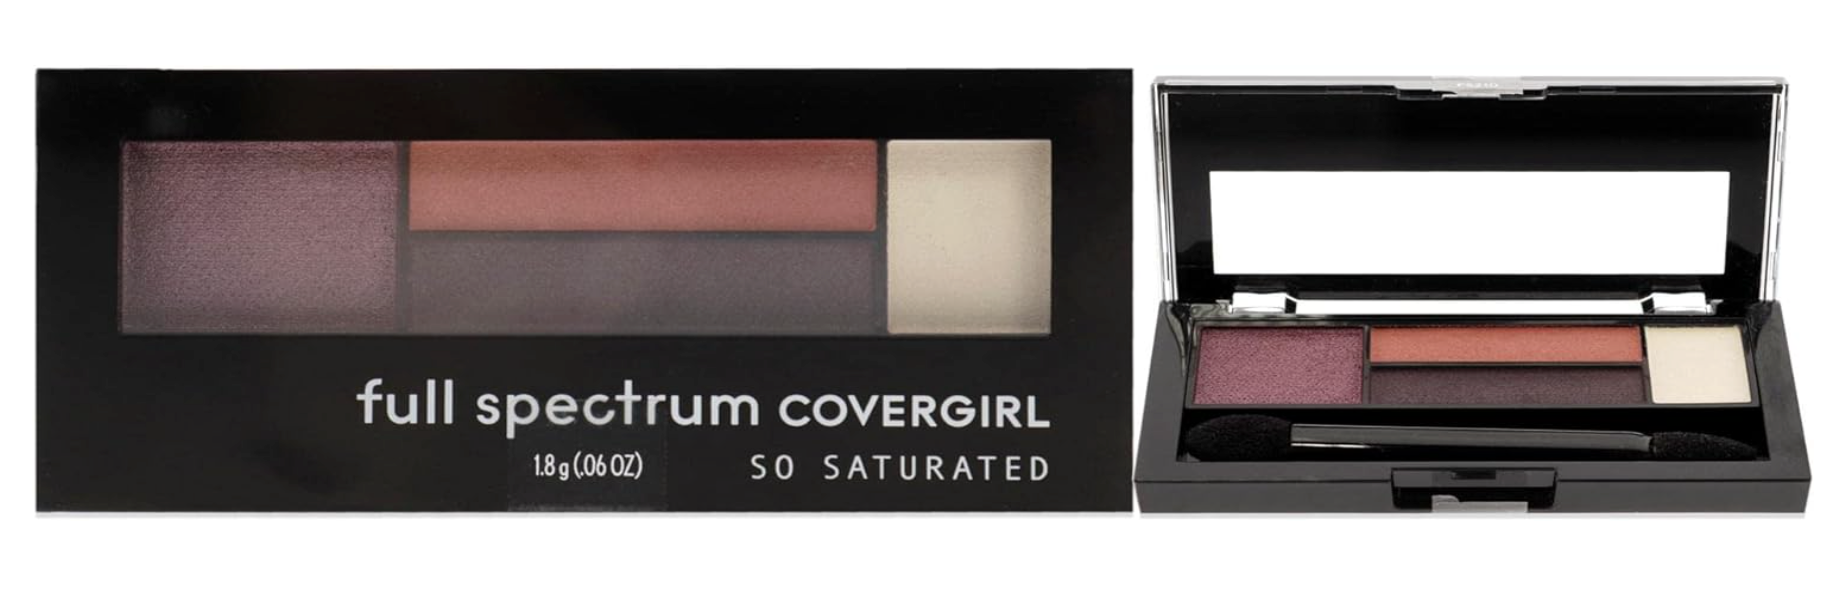 CoverGirl Full Spectrum So Saturated: Quad Eyeshadow Palette, With it